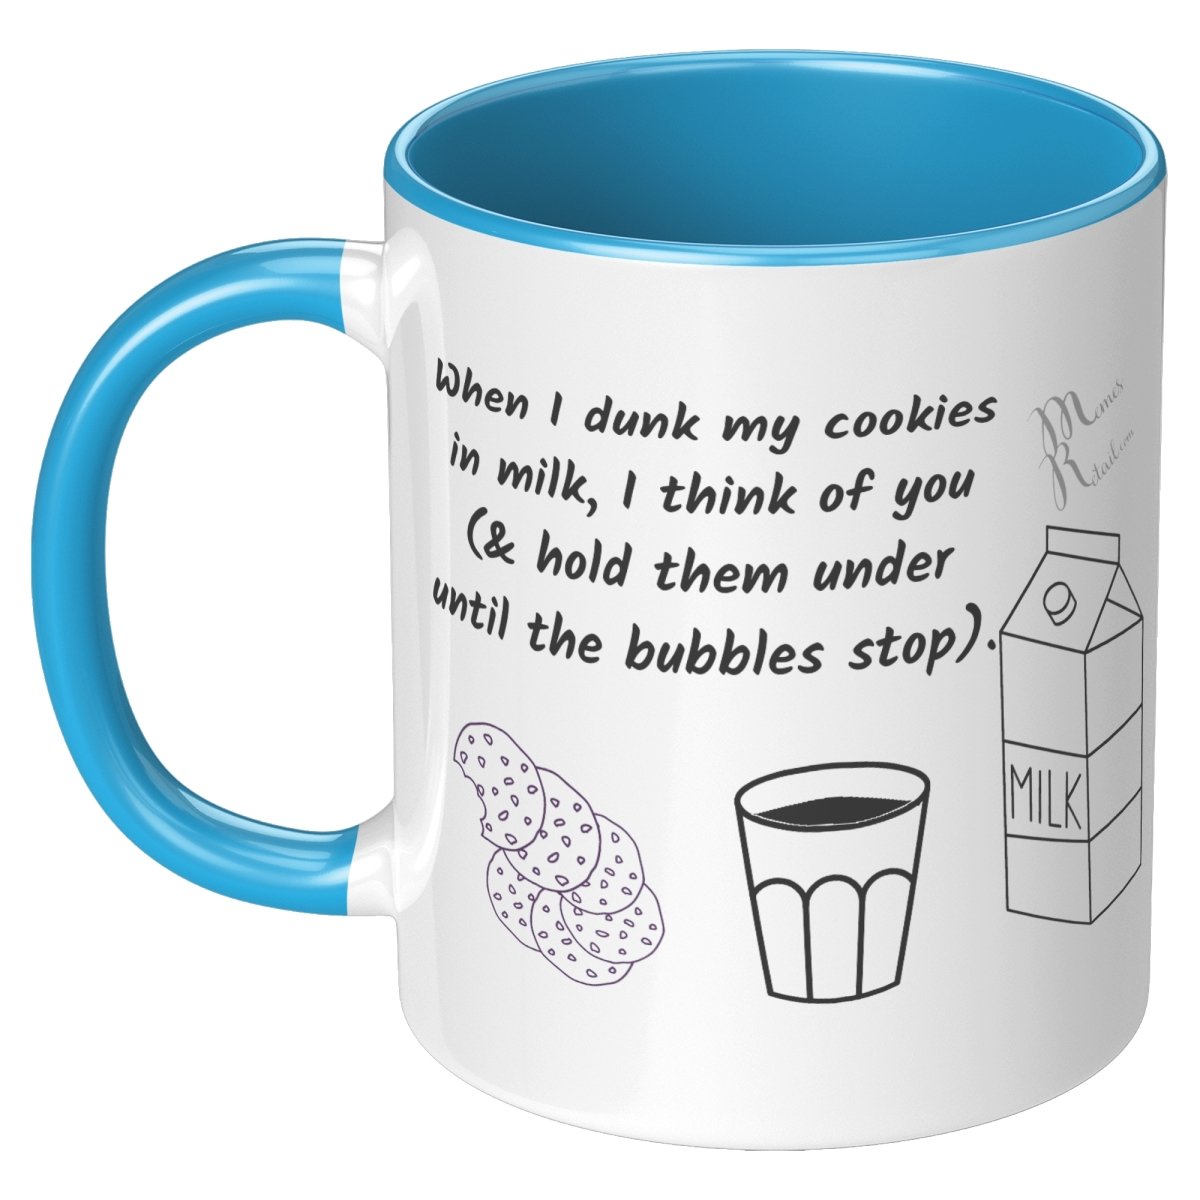 When I dunk My Cookies in Milk, I think of You - 11oz/15oz Mugs, 11oz / Blue Accent - MemesRetail.com